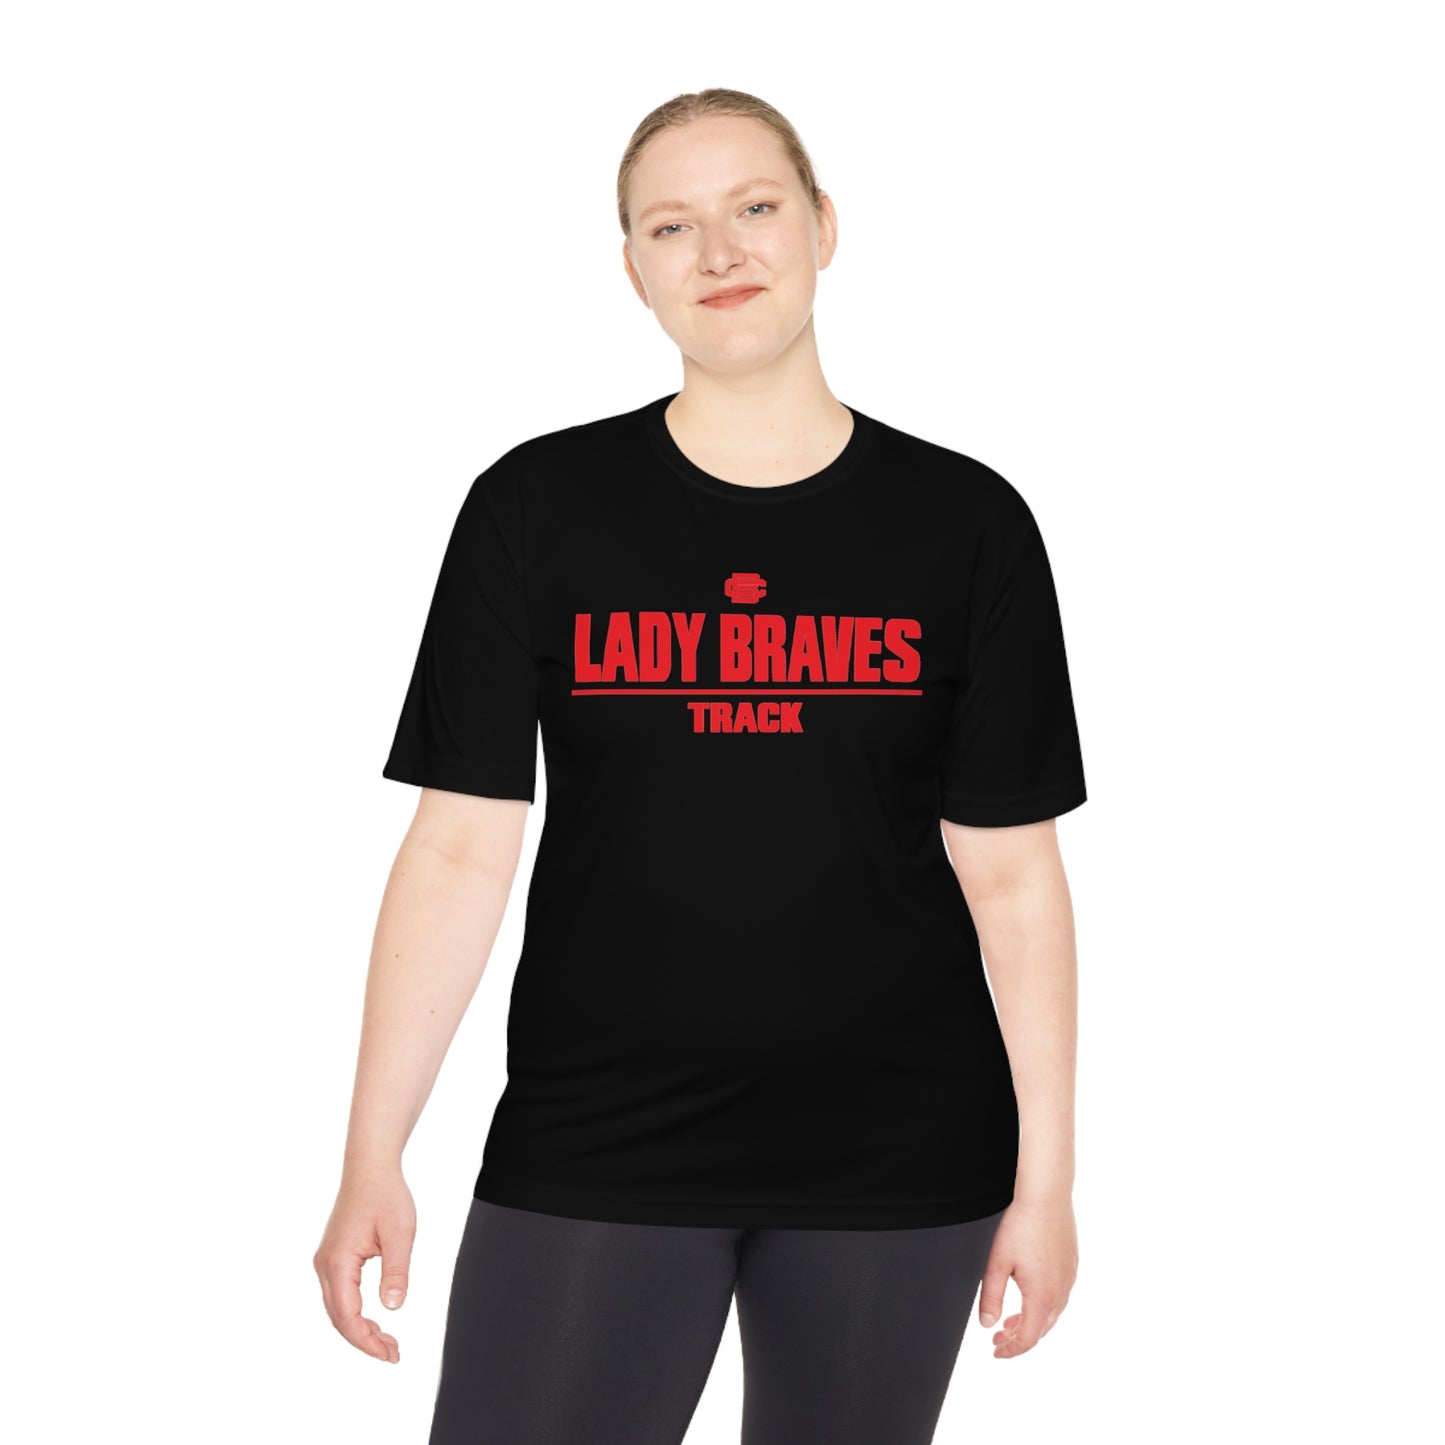 Lady Braves Track Moisture Wicking Tee